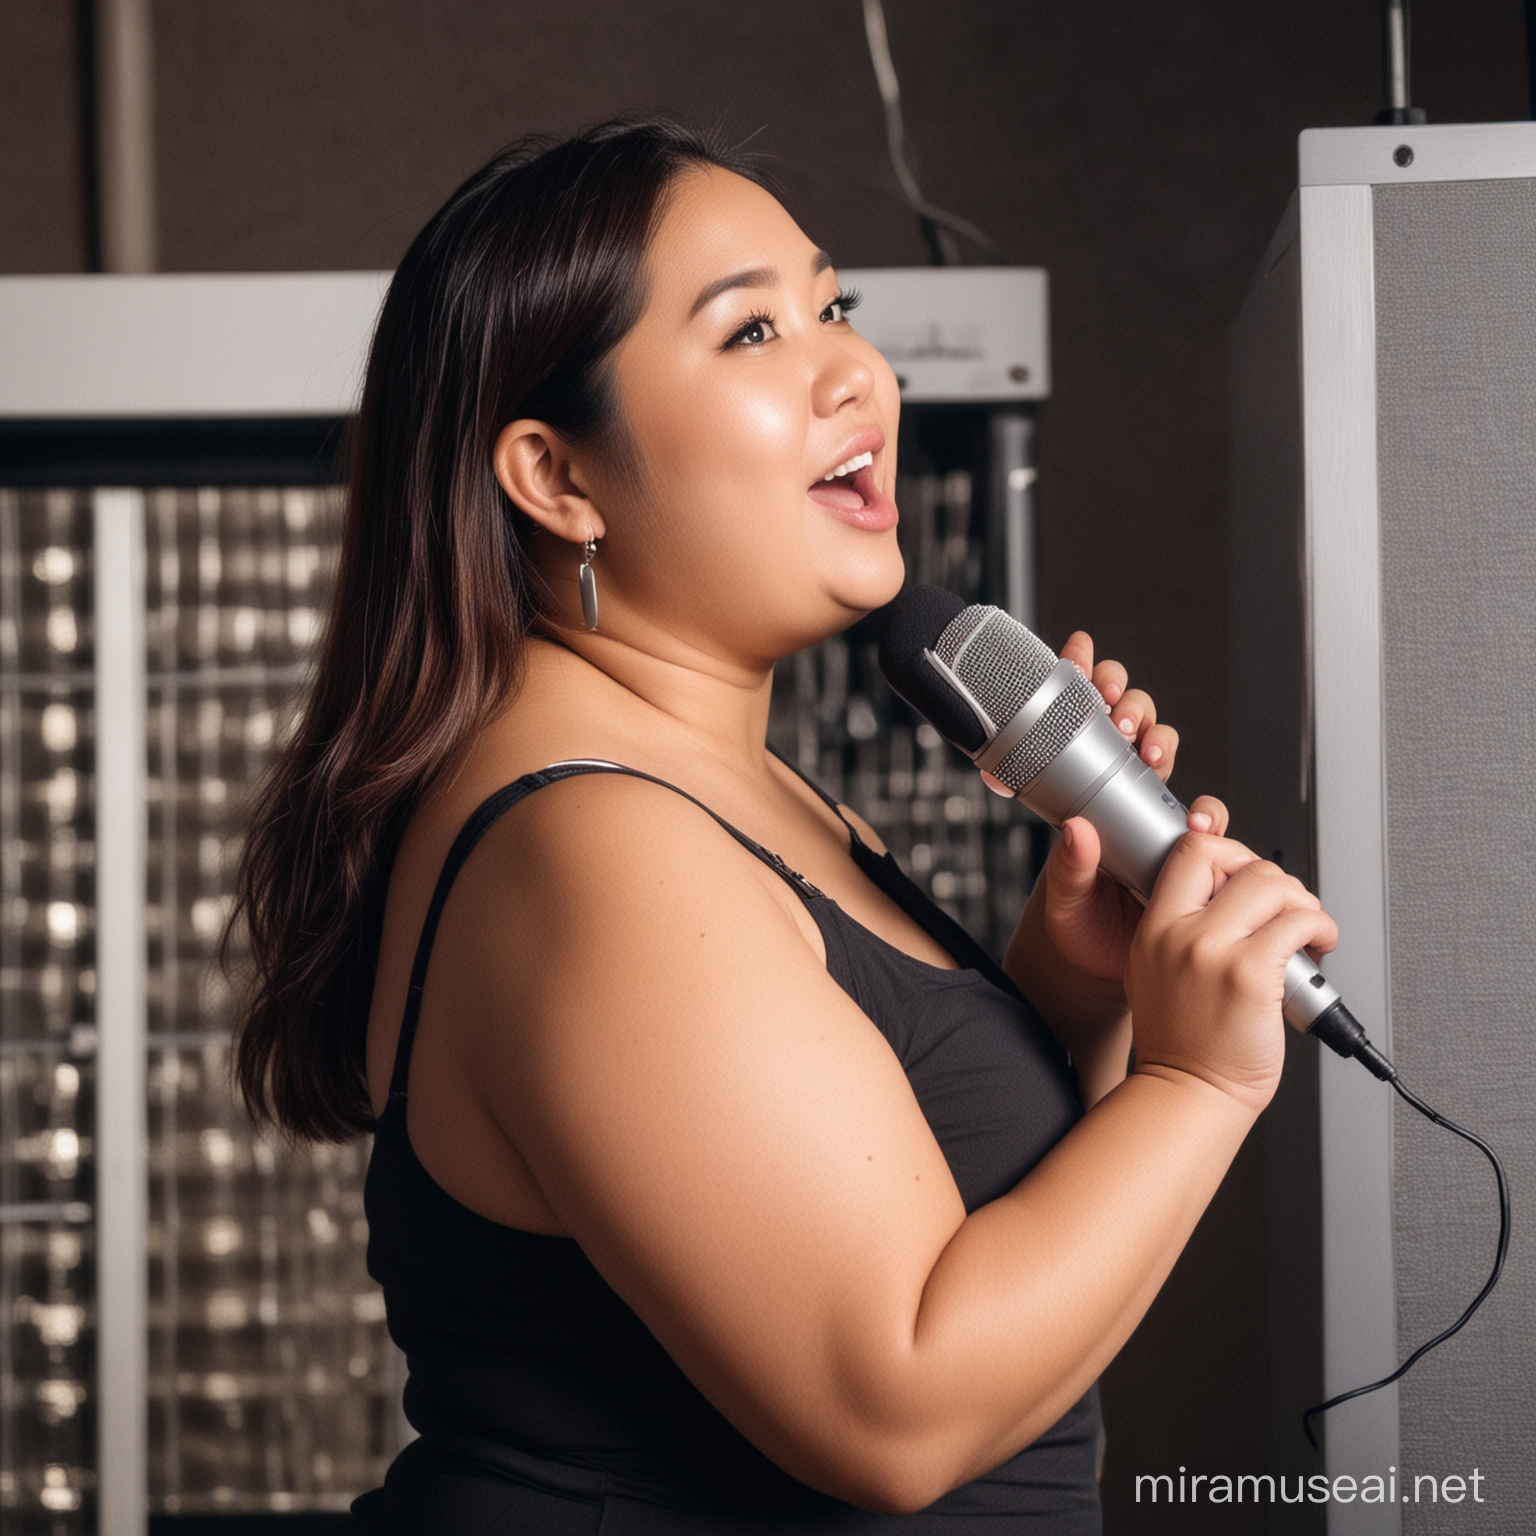 A chubby Filipina Woman holding a microphone facing a videoke machine. Make sure that the woman is on side view